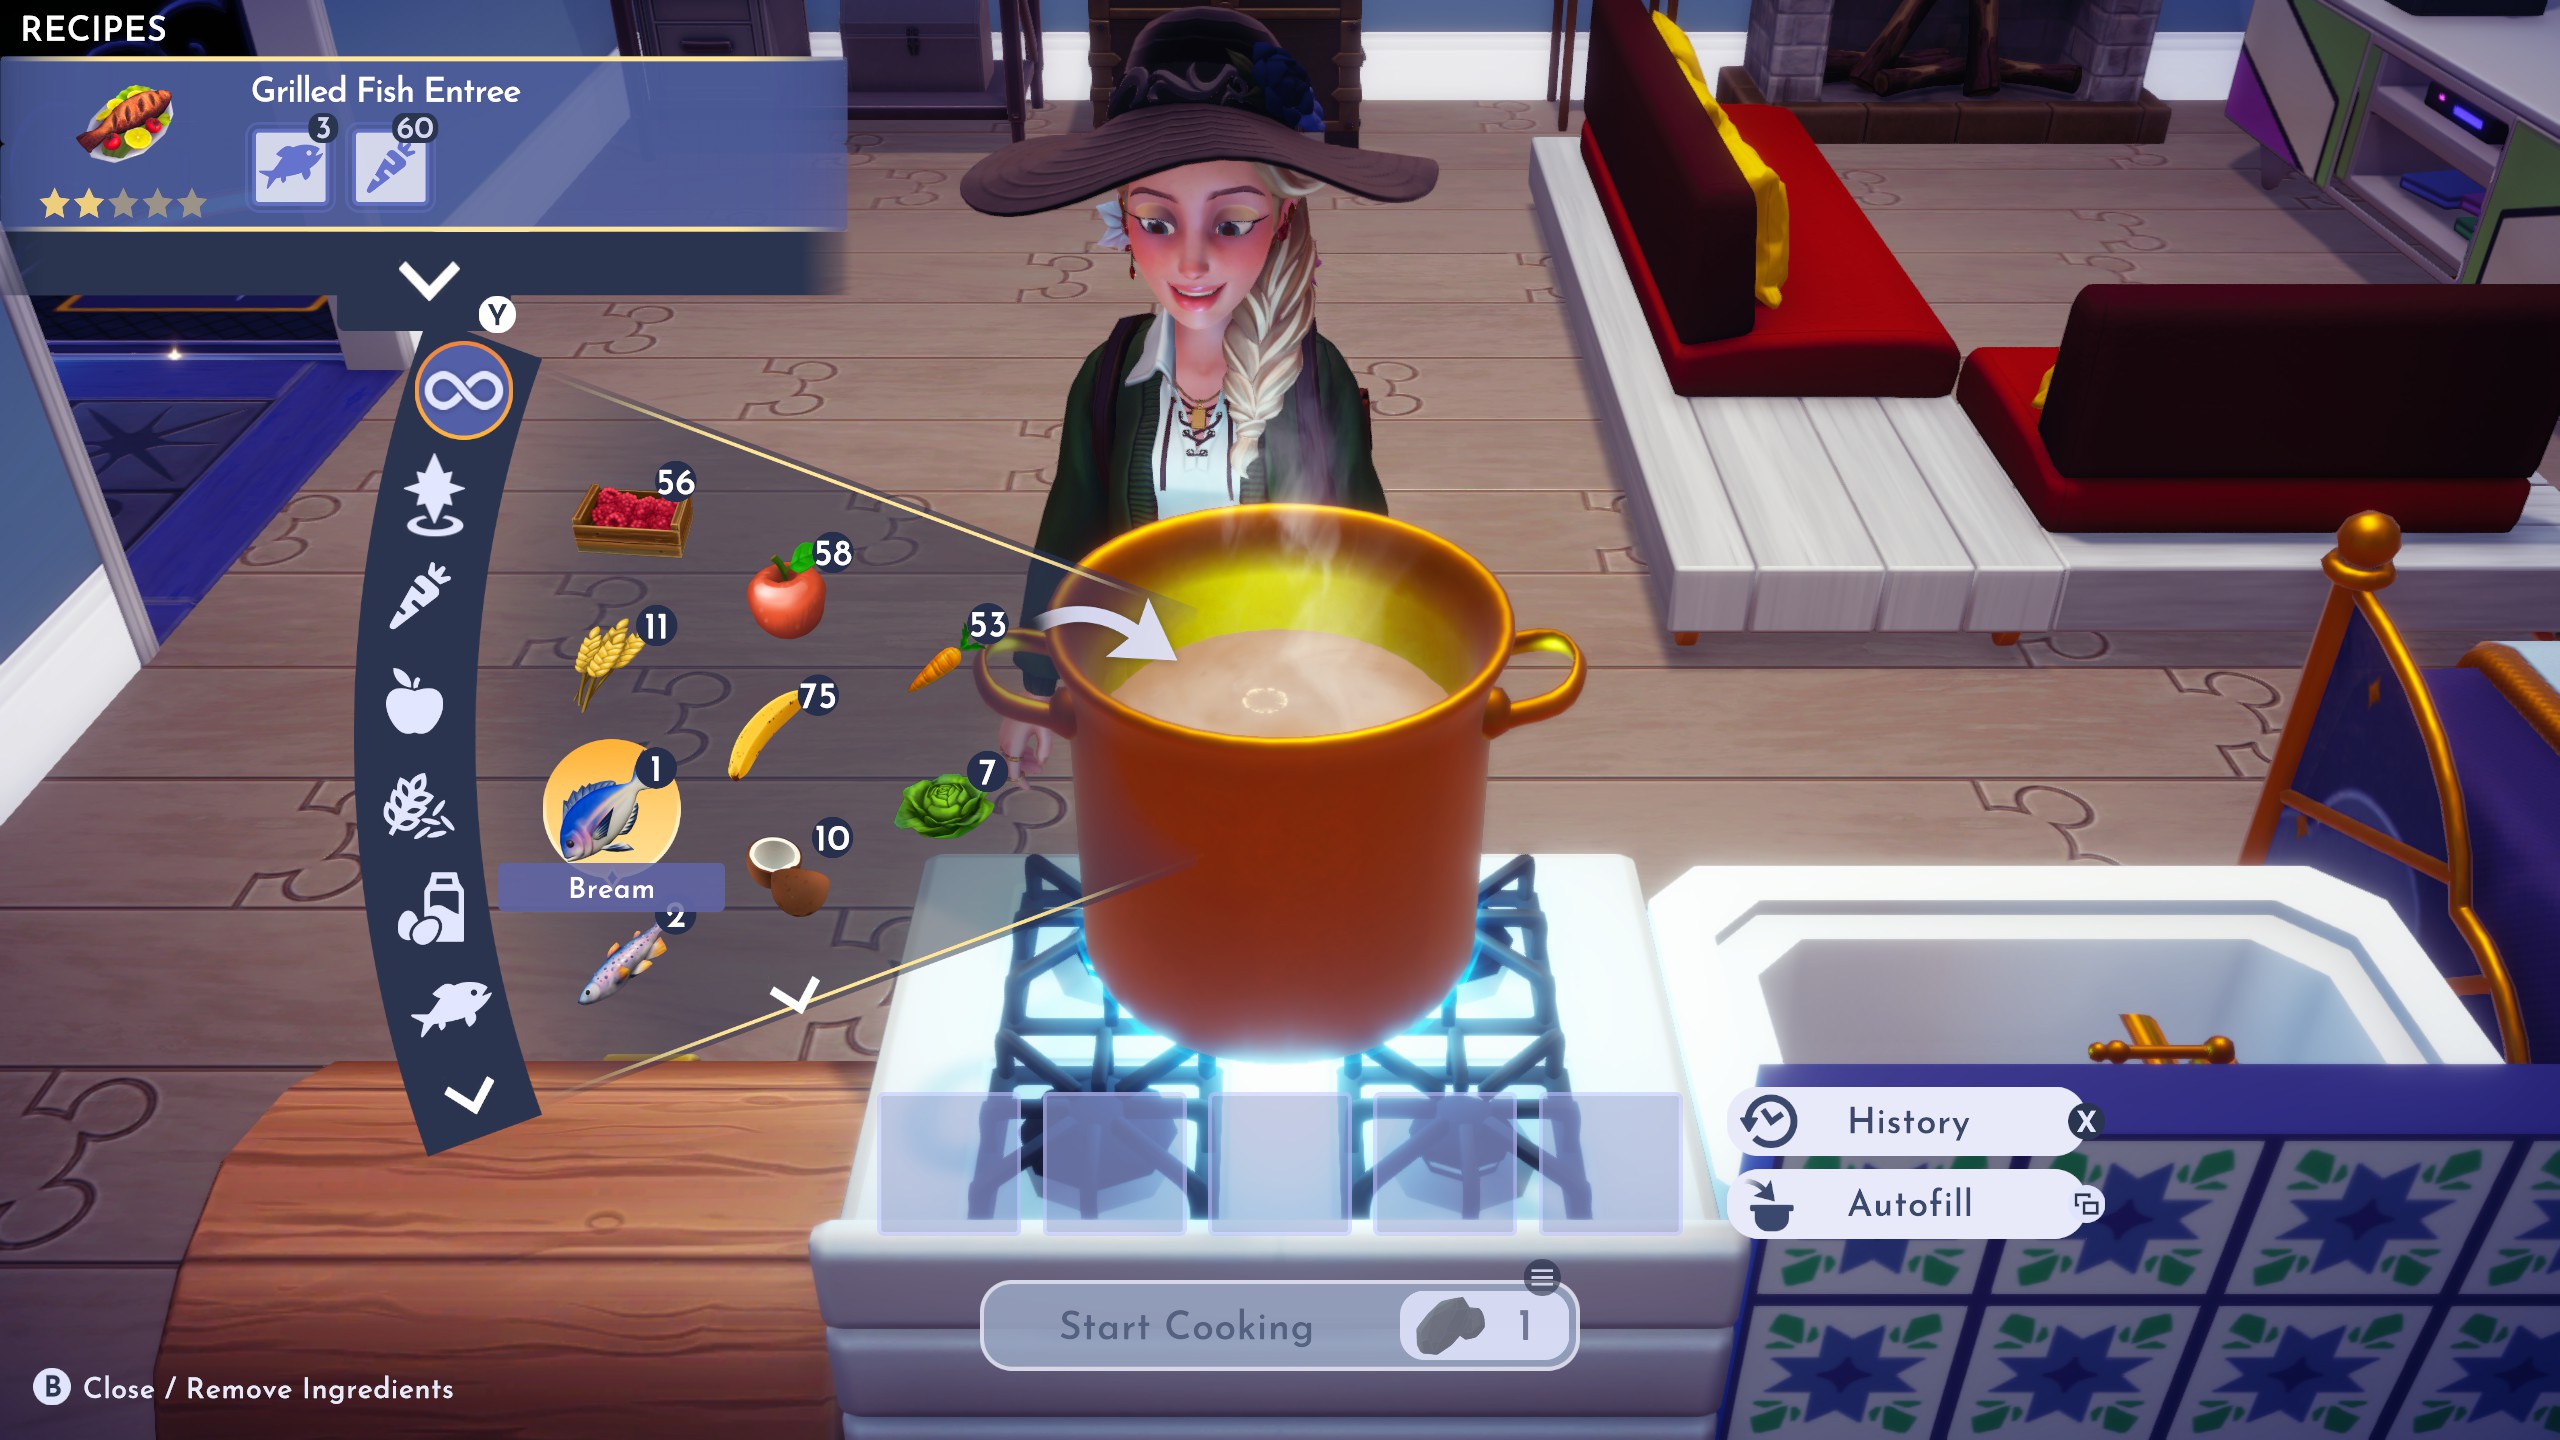 Disney Dreamlight Valley - A player stands over a boiling pot at a stove in their home, choosing ingredients for a grilled fish entree.